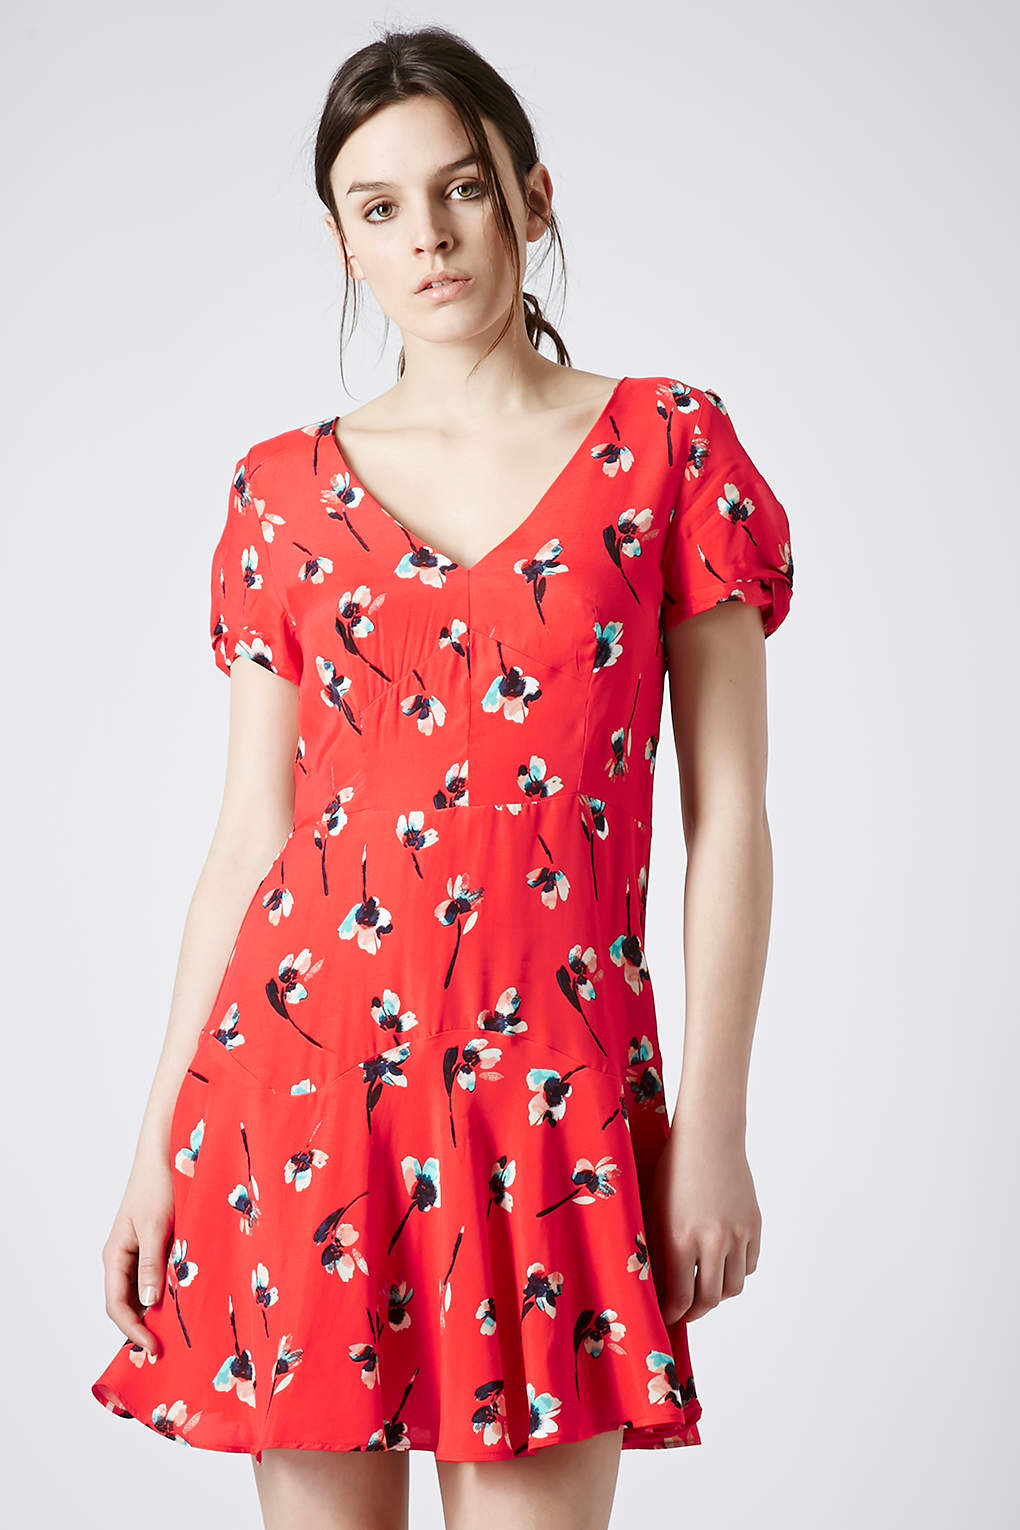 Lyst - Topshop Painted Floral Dress in Red